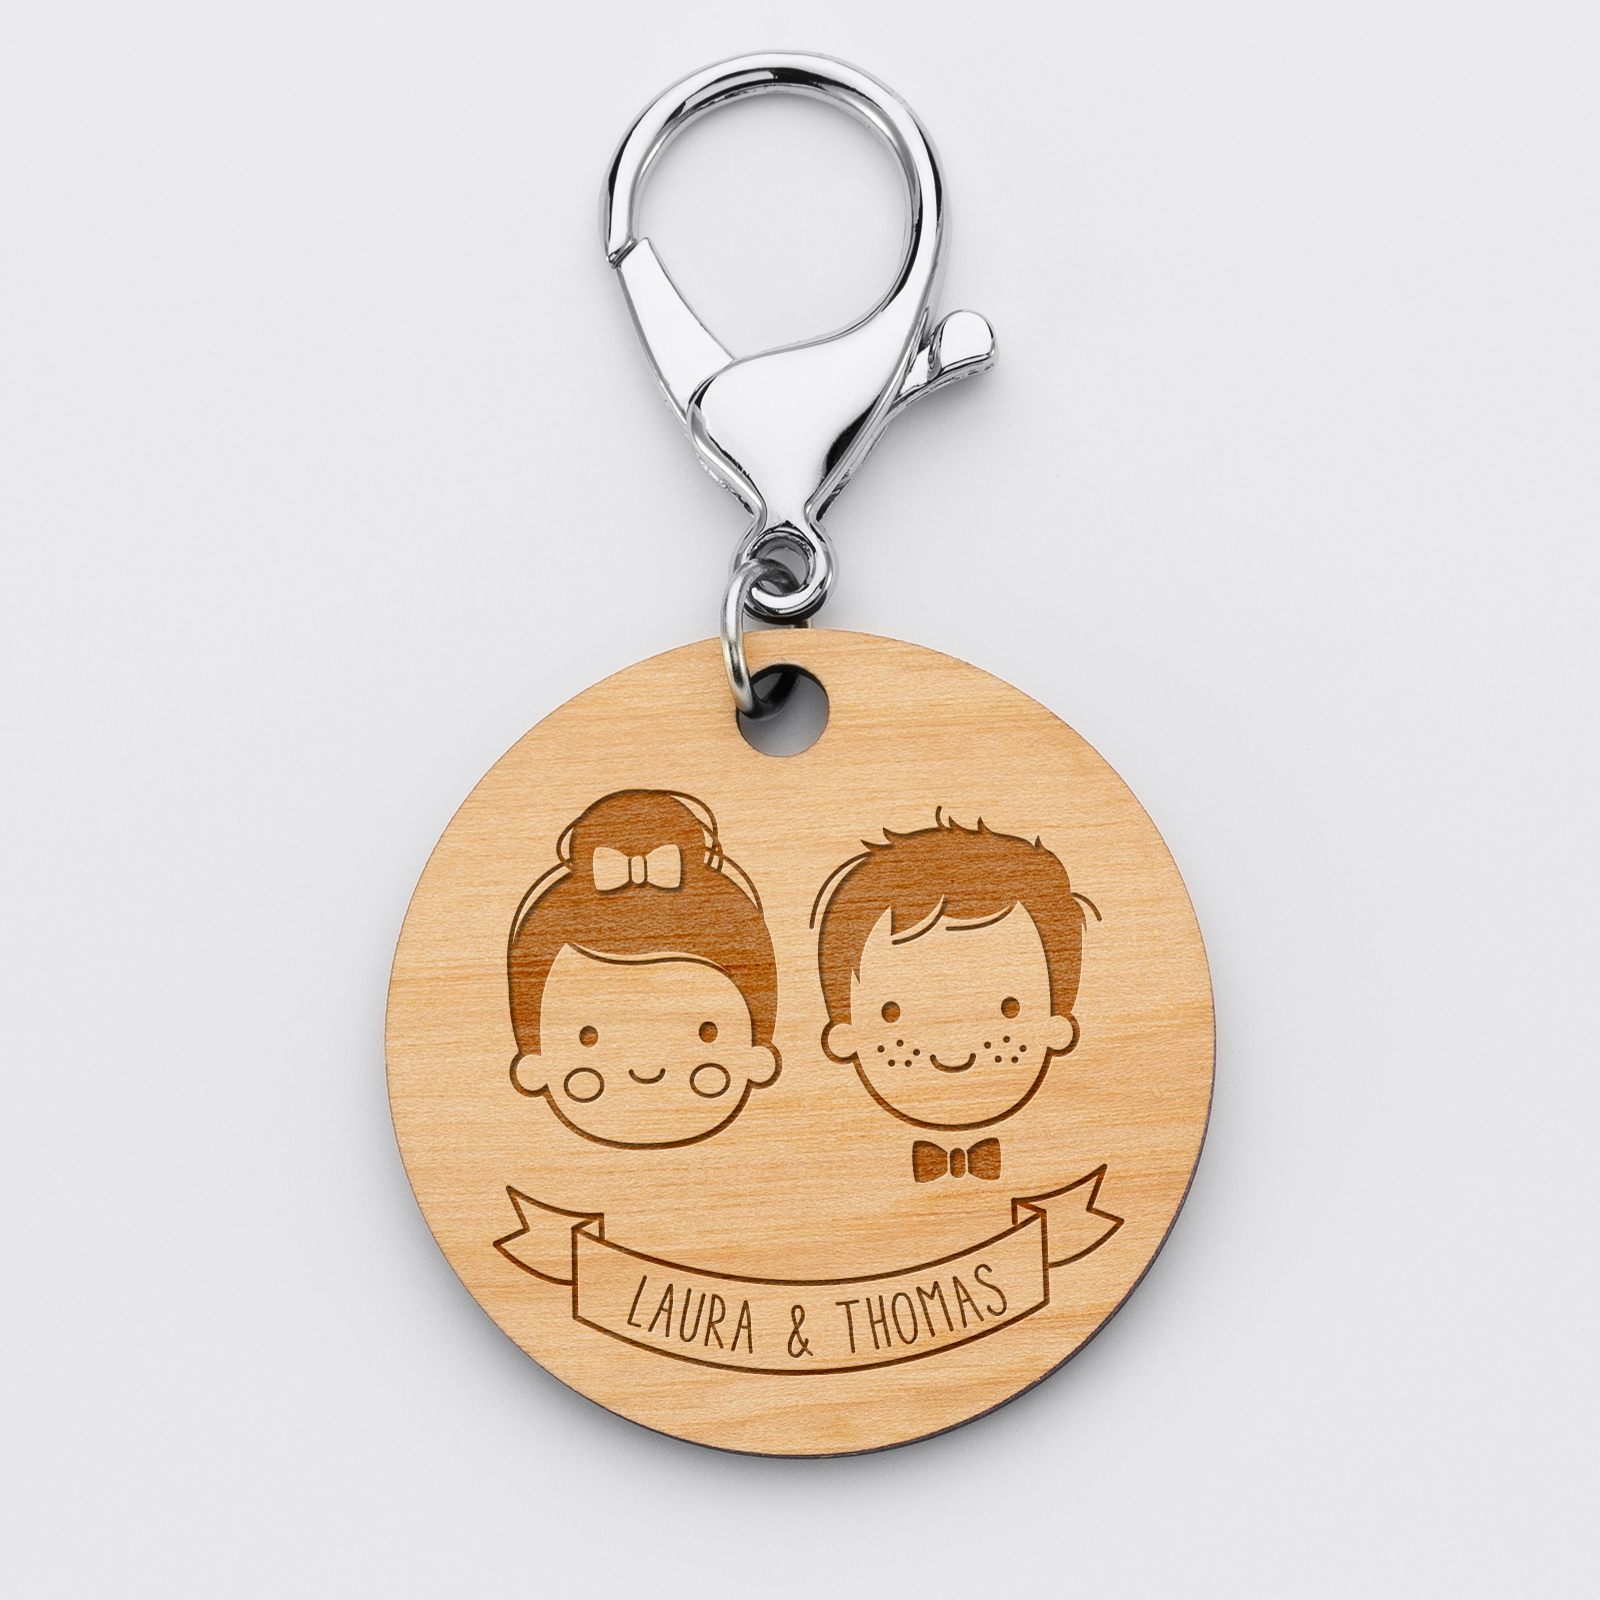 Personalised engraved wooden "for lovers" round names medallion keyring 50mm - 1